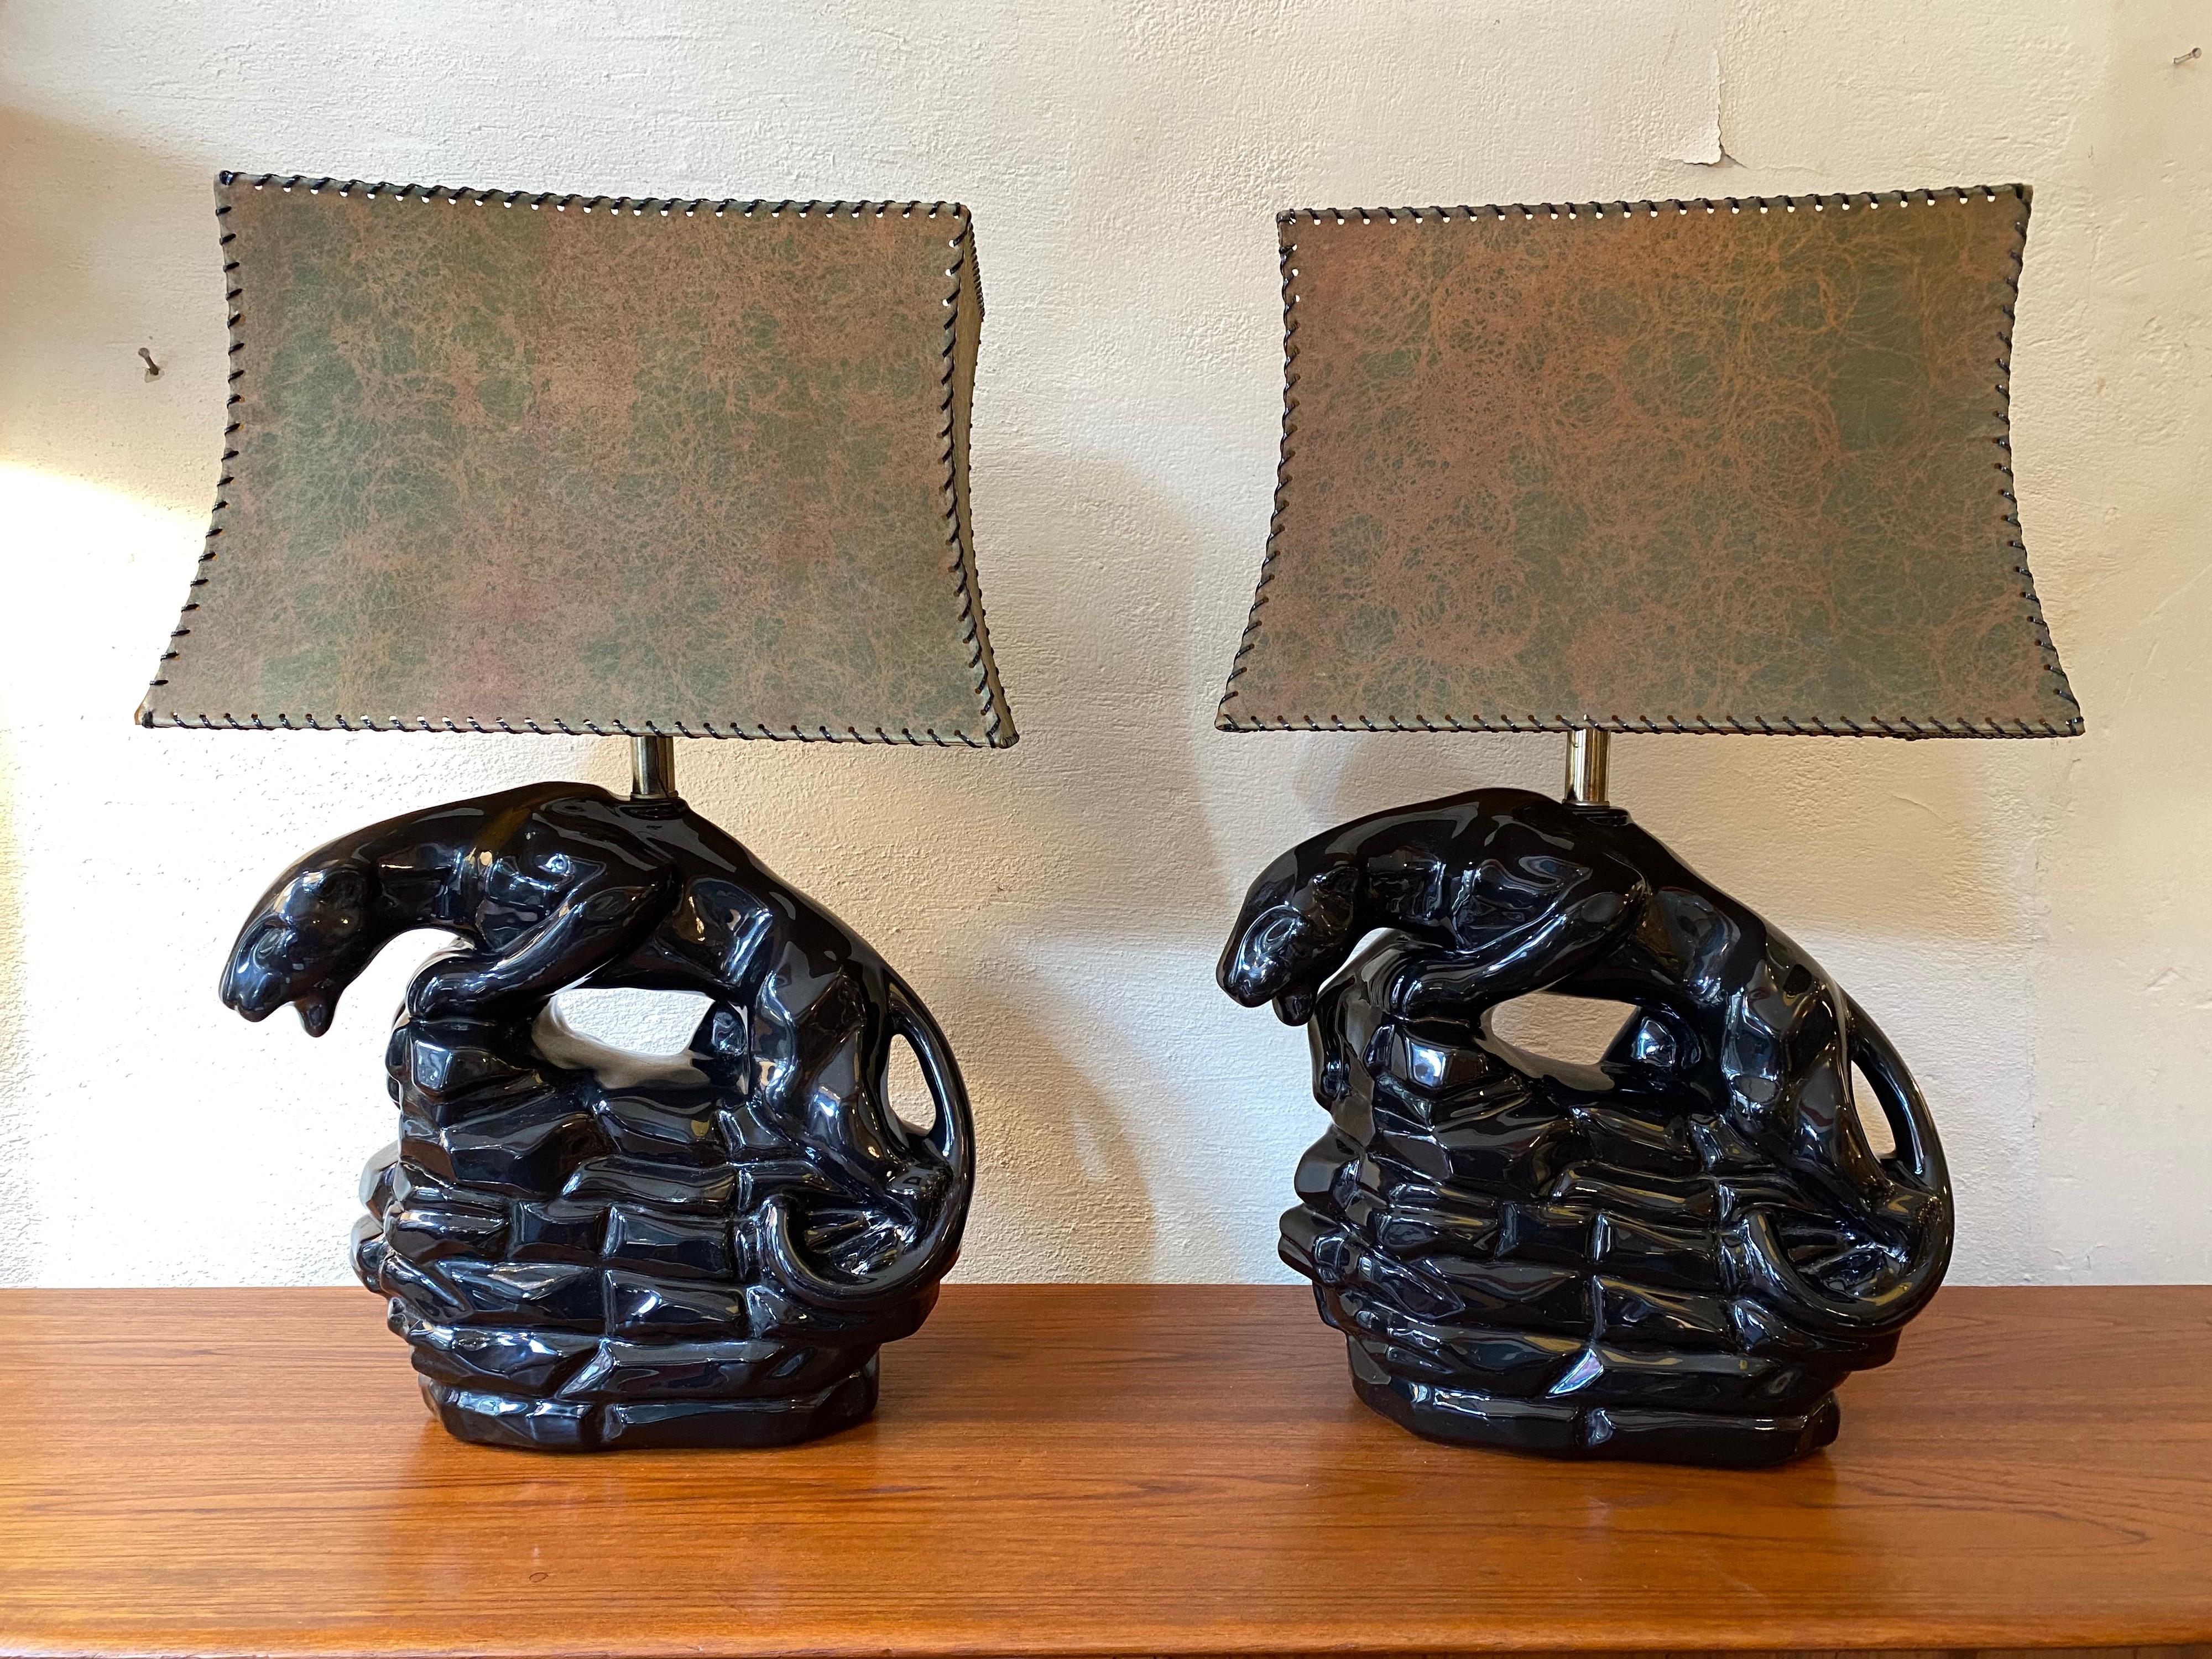 Pair of ceramic black panther table lamps with fiberglass lampshades. Lamps in great shape, fiberglass shades have had the gimp replaced and look great! Nice scale and size! Ceramic very nice condition!